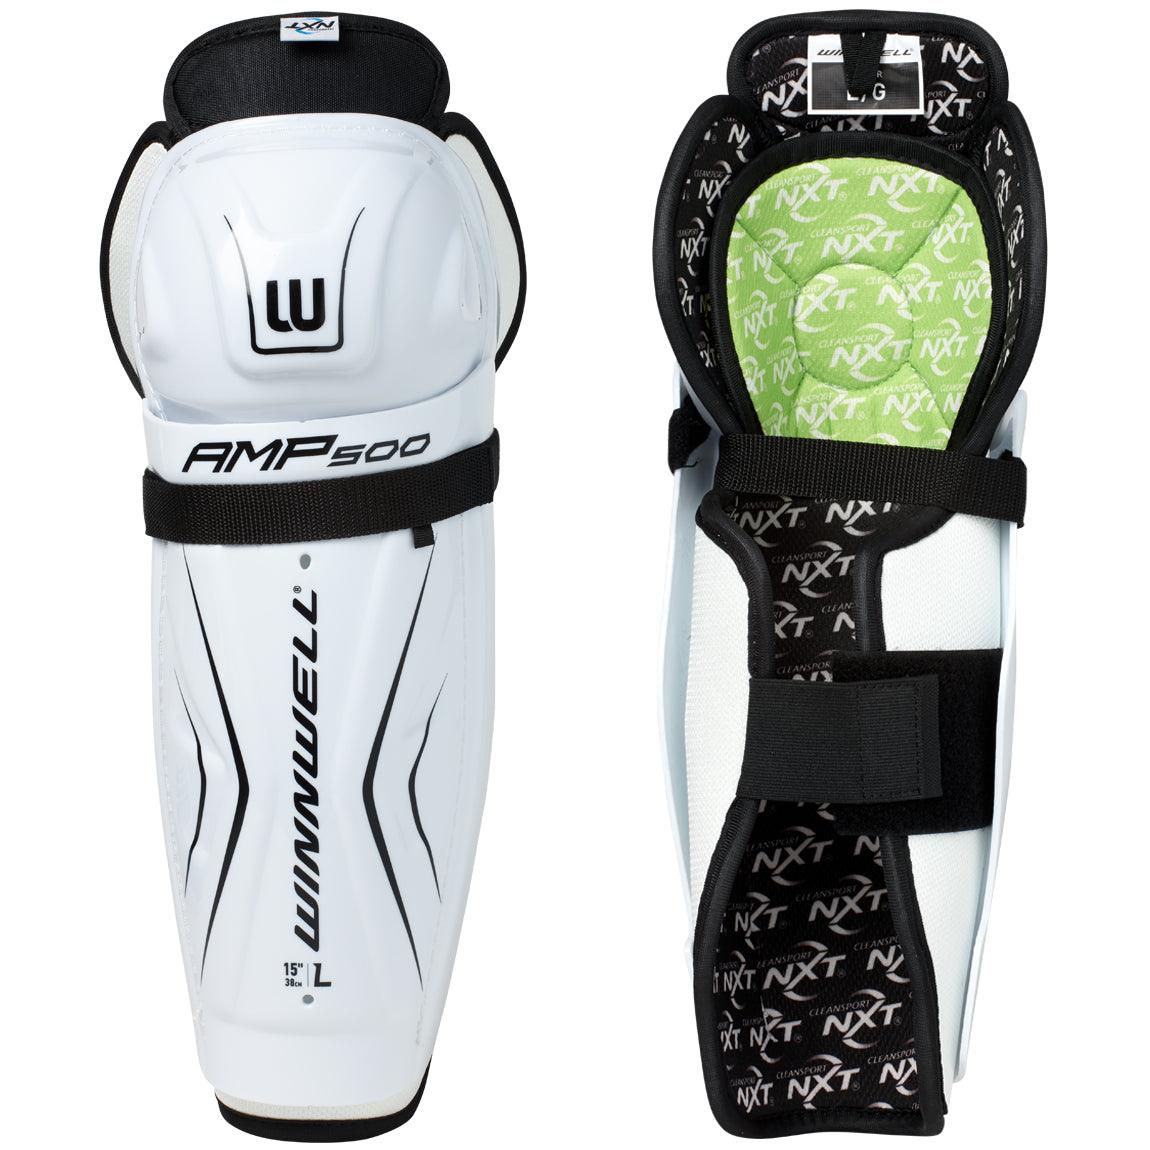 AMP500 Shin Pads - Sports Excellence